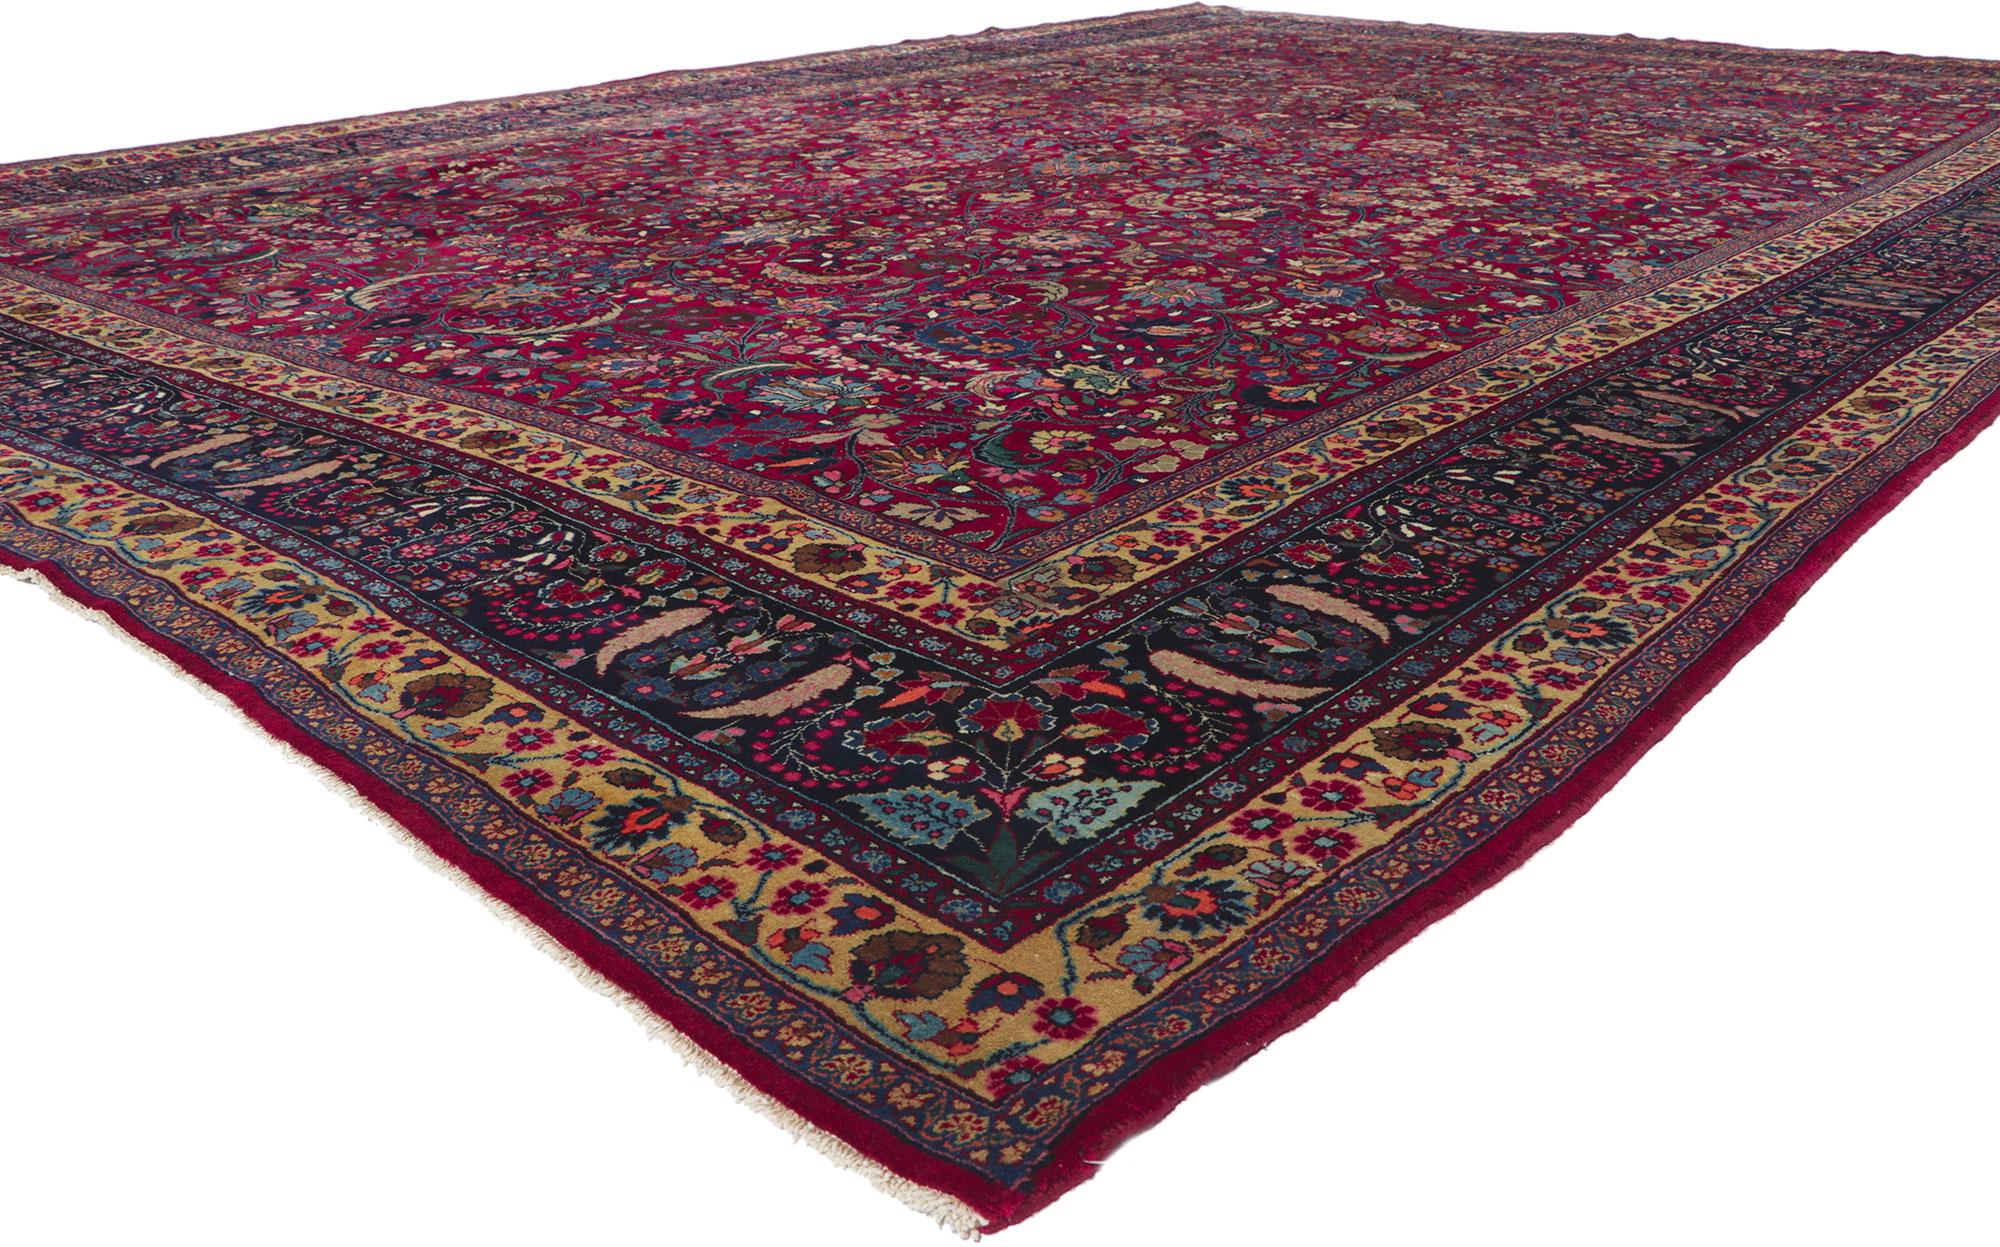 61174 Antique Persian Mashhad Rug, 10'11 x 15'11.
With its beguiling beauty, incredible detail and texture, this hand knotted wool antique Persian Mashhad rug is a captivating vision of woven beauty. The timeless botanical design and refined color